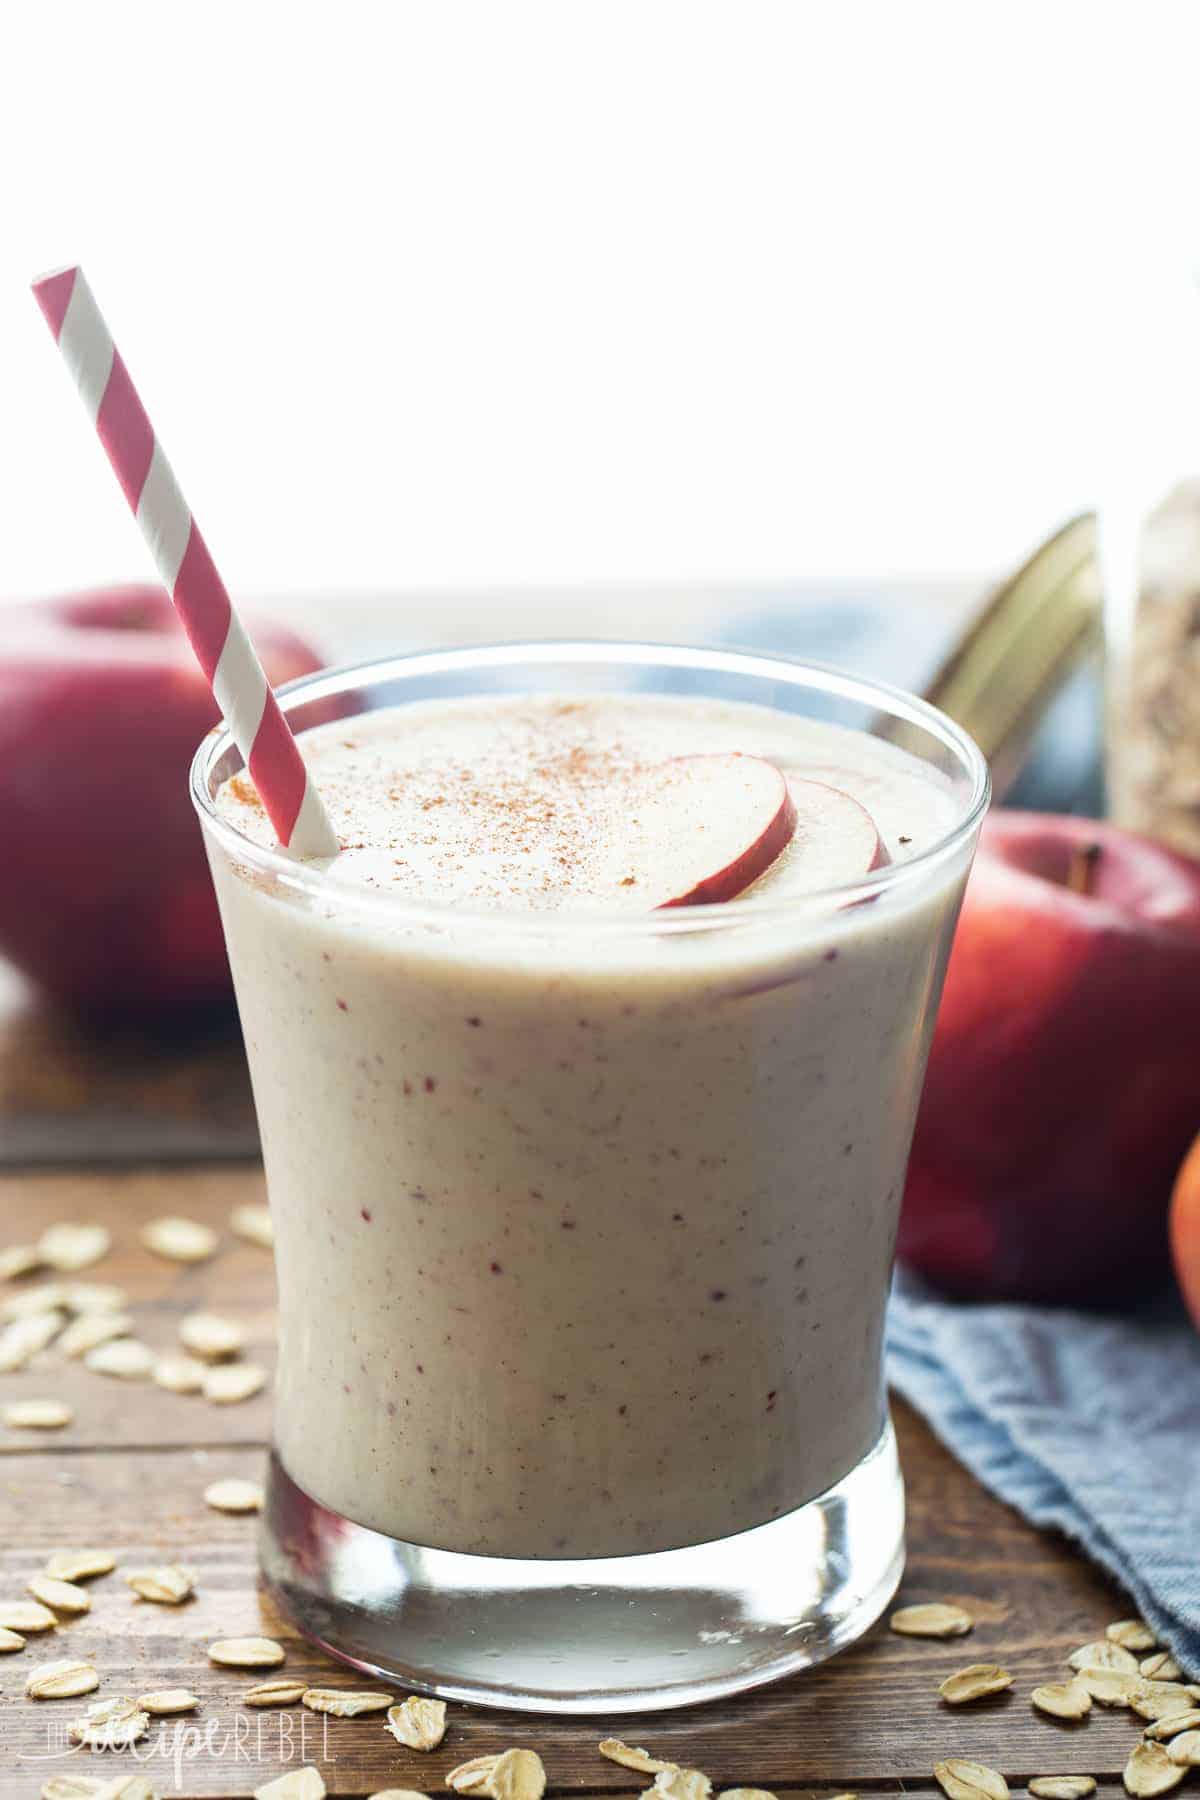 small glass with apple crisp smoothie dusted with cinnamon and red striped straw